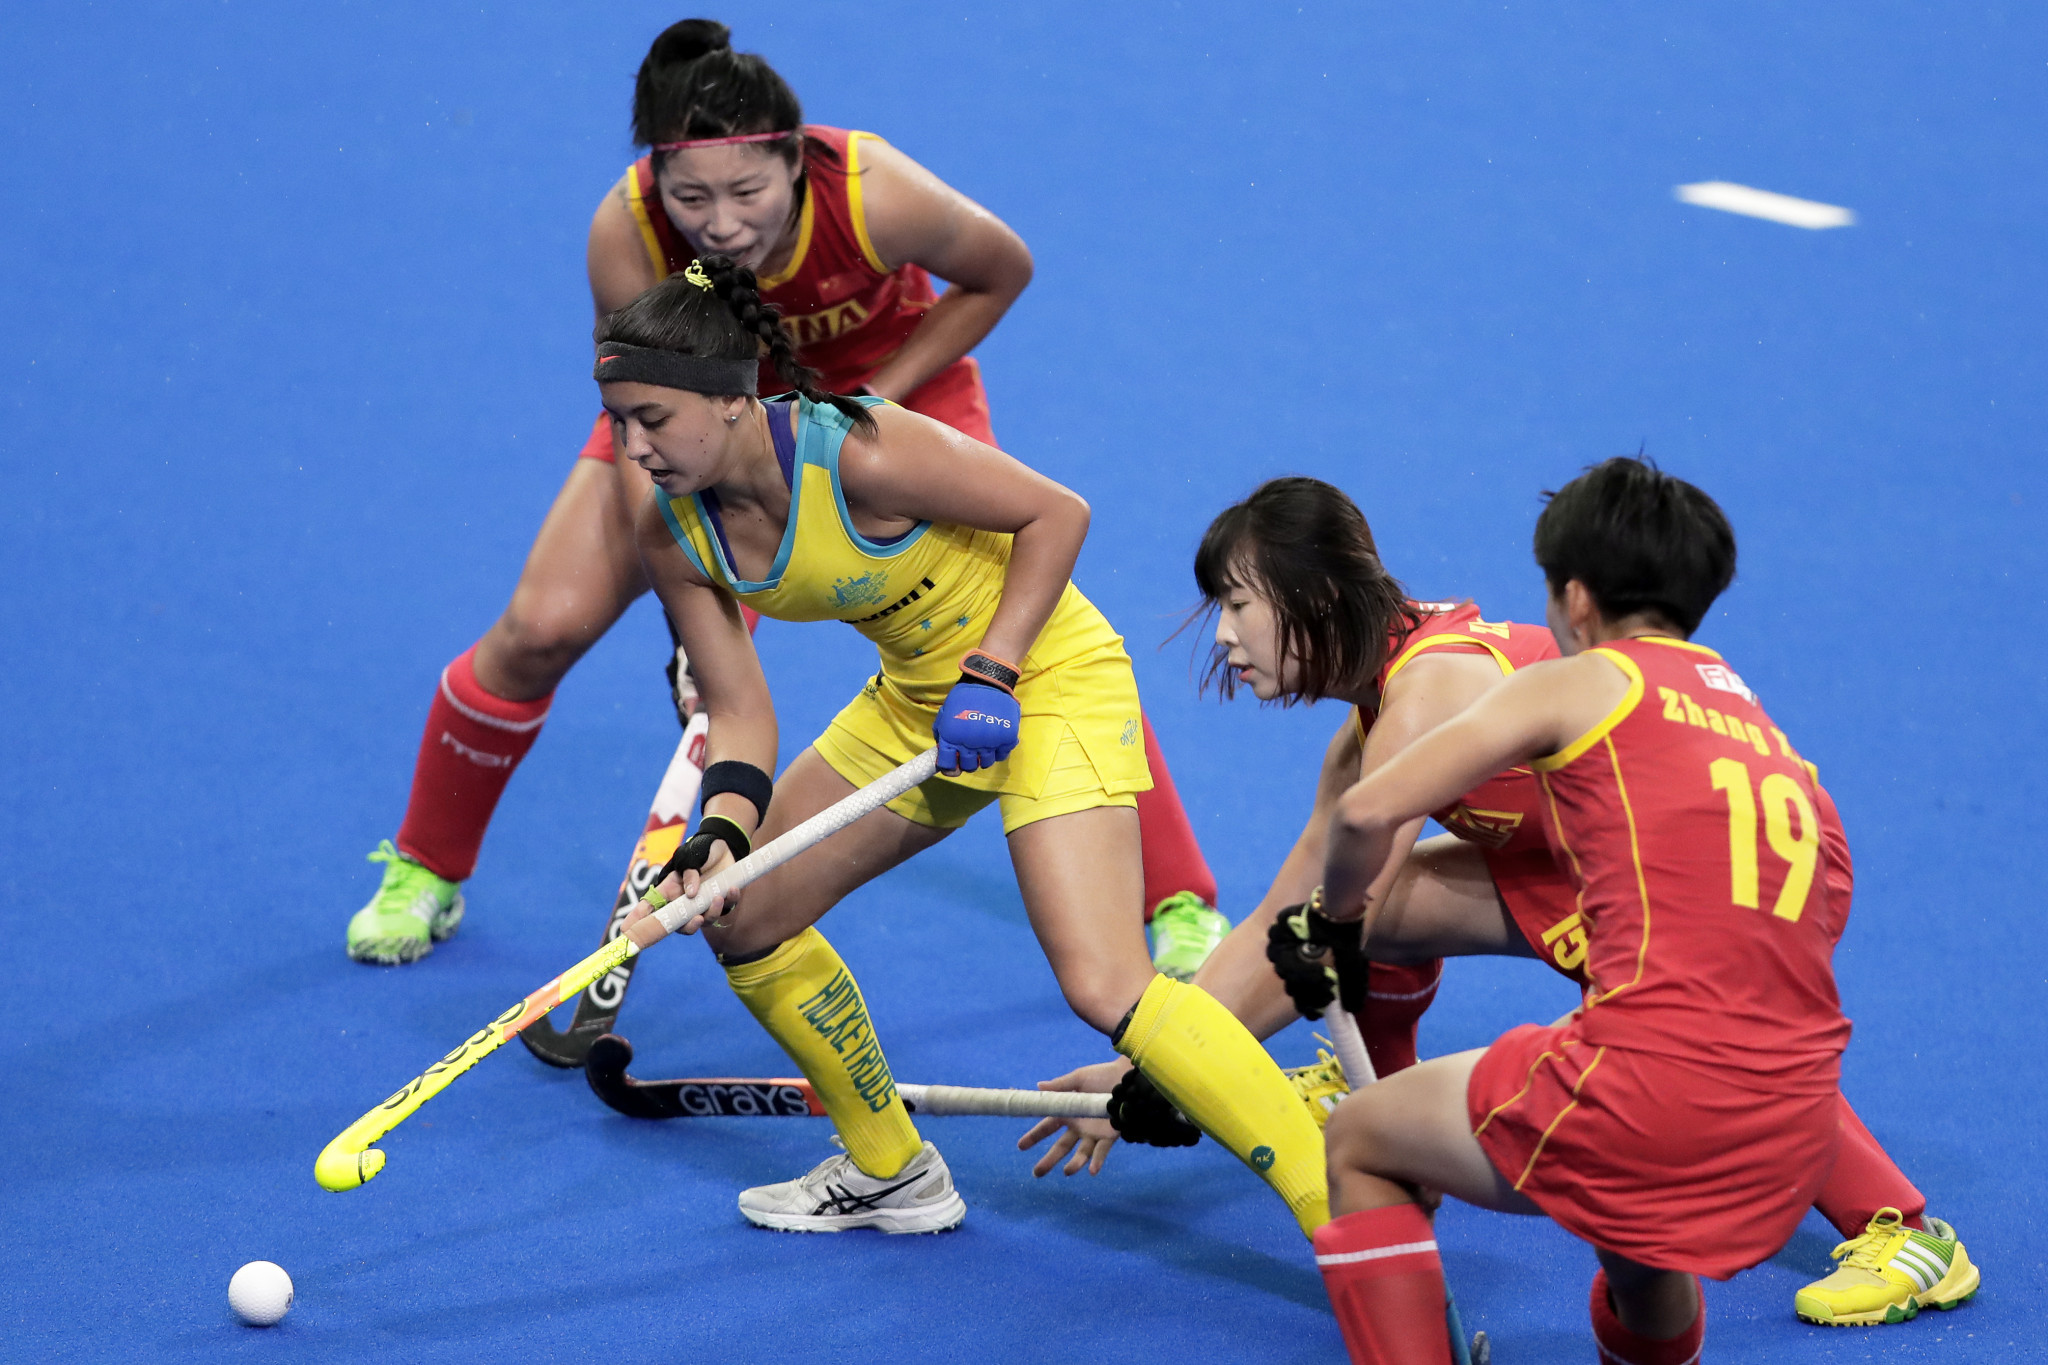 FIH reopen World Cup bidding process, as Australia withdraws from race for 2023 women's event